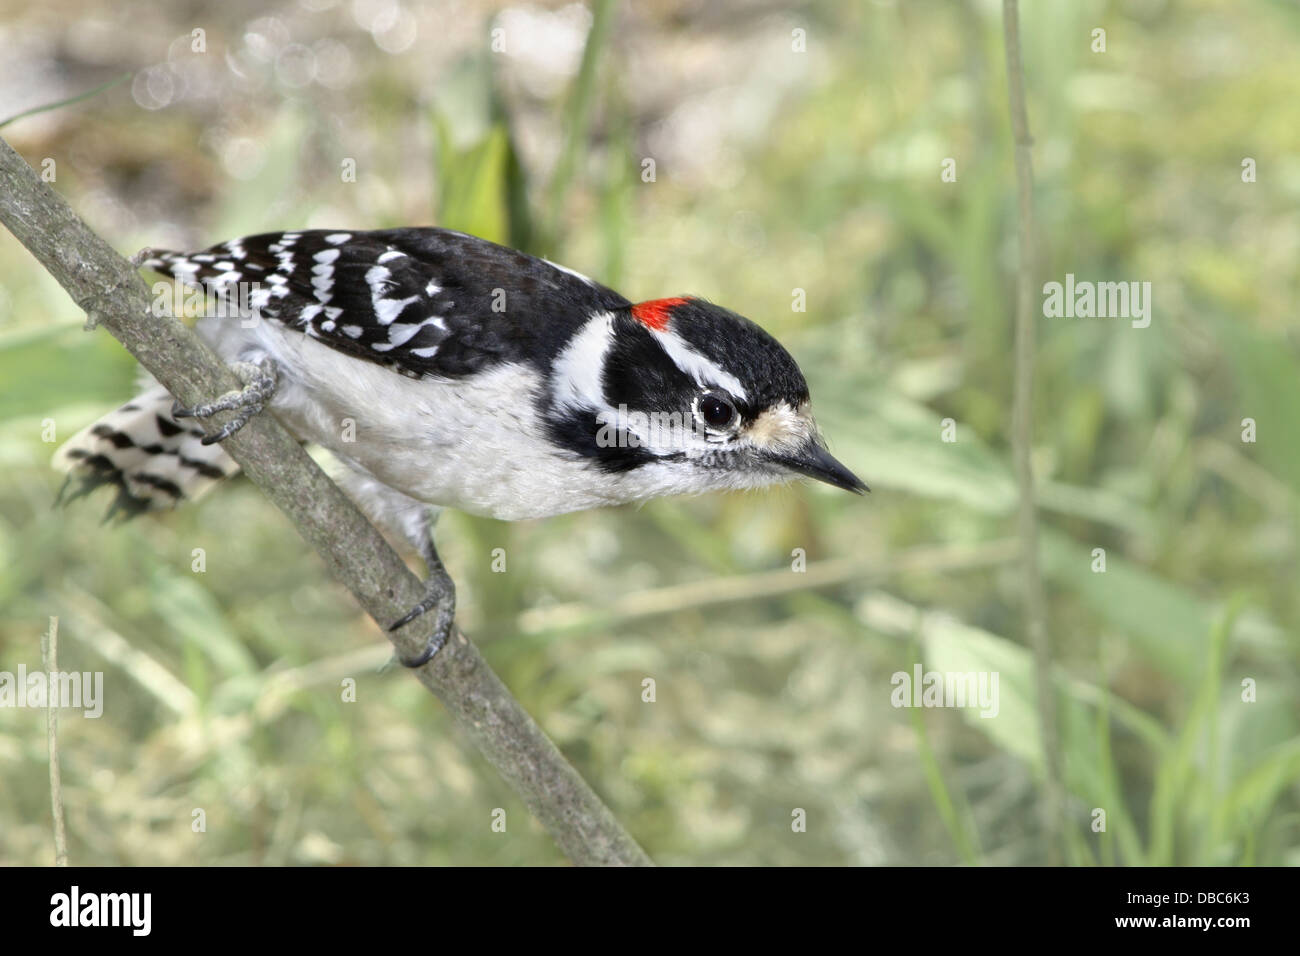 A Cute Little Bird, The Downy Woodpecker, Craning It's Neck, Picoides pubescens Stock Photo